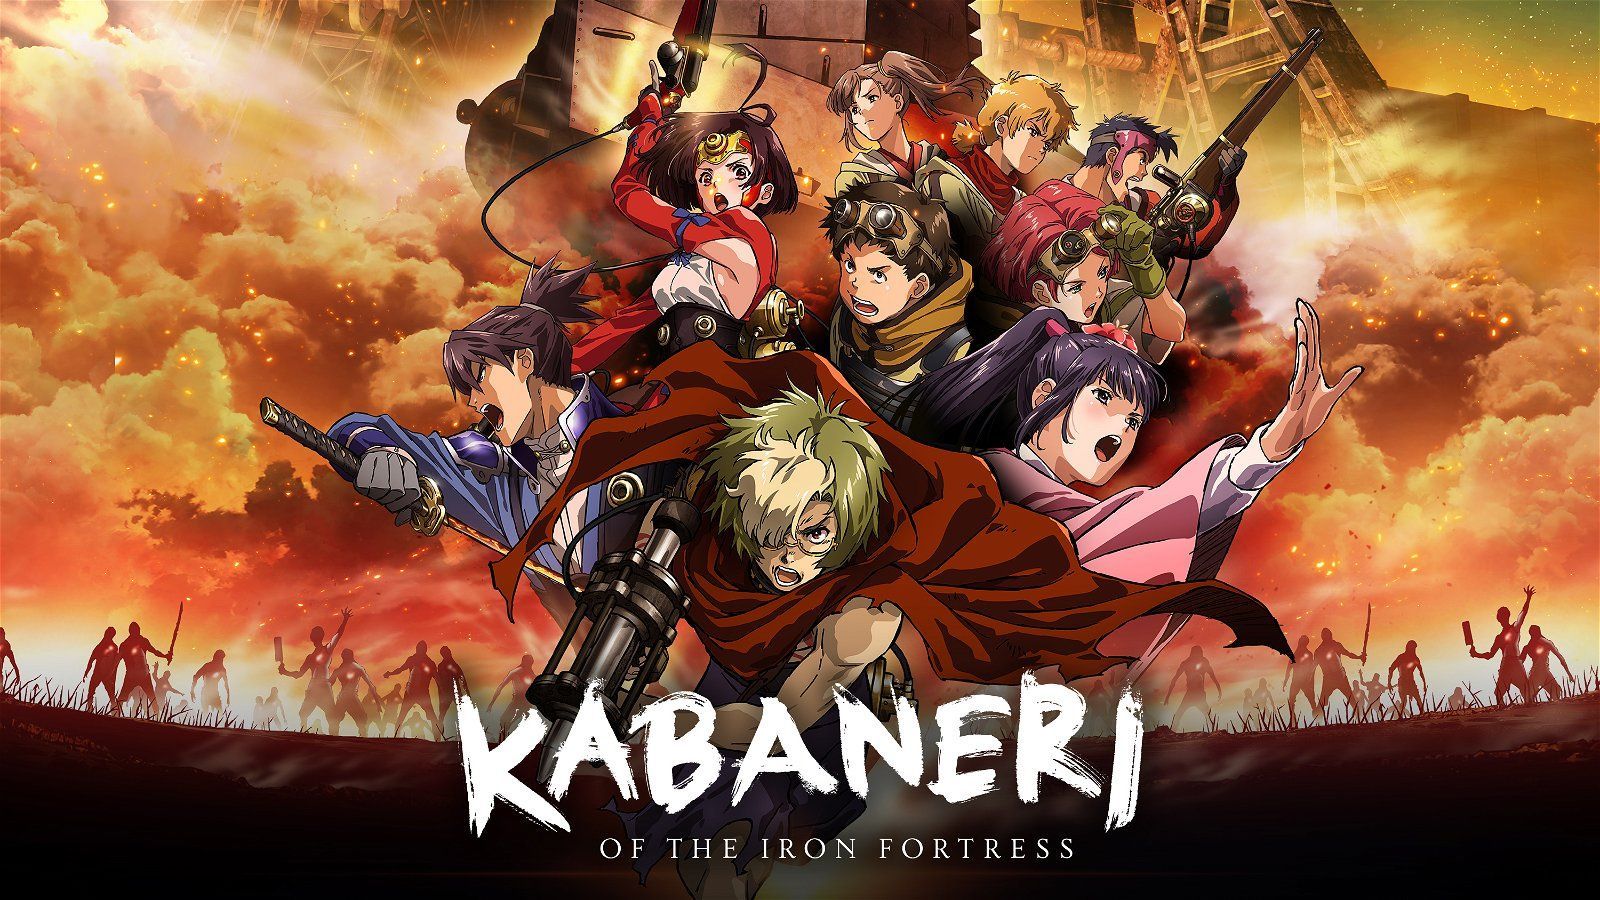 Kabaneri of the Iron Fortress Ep. 12 (Finale): Dreams of rice paddies live  on